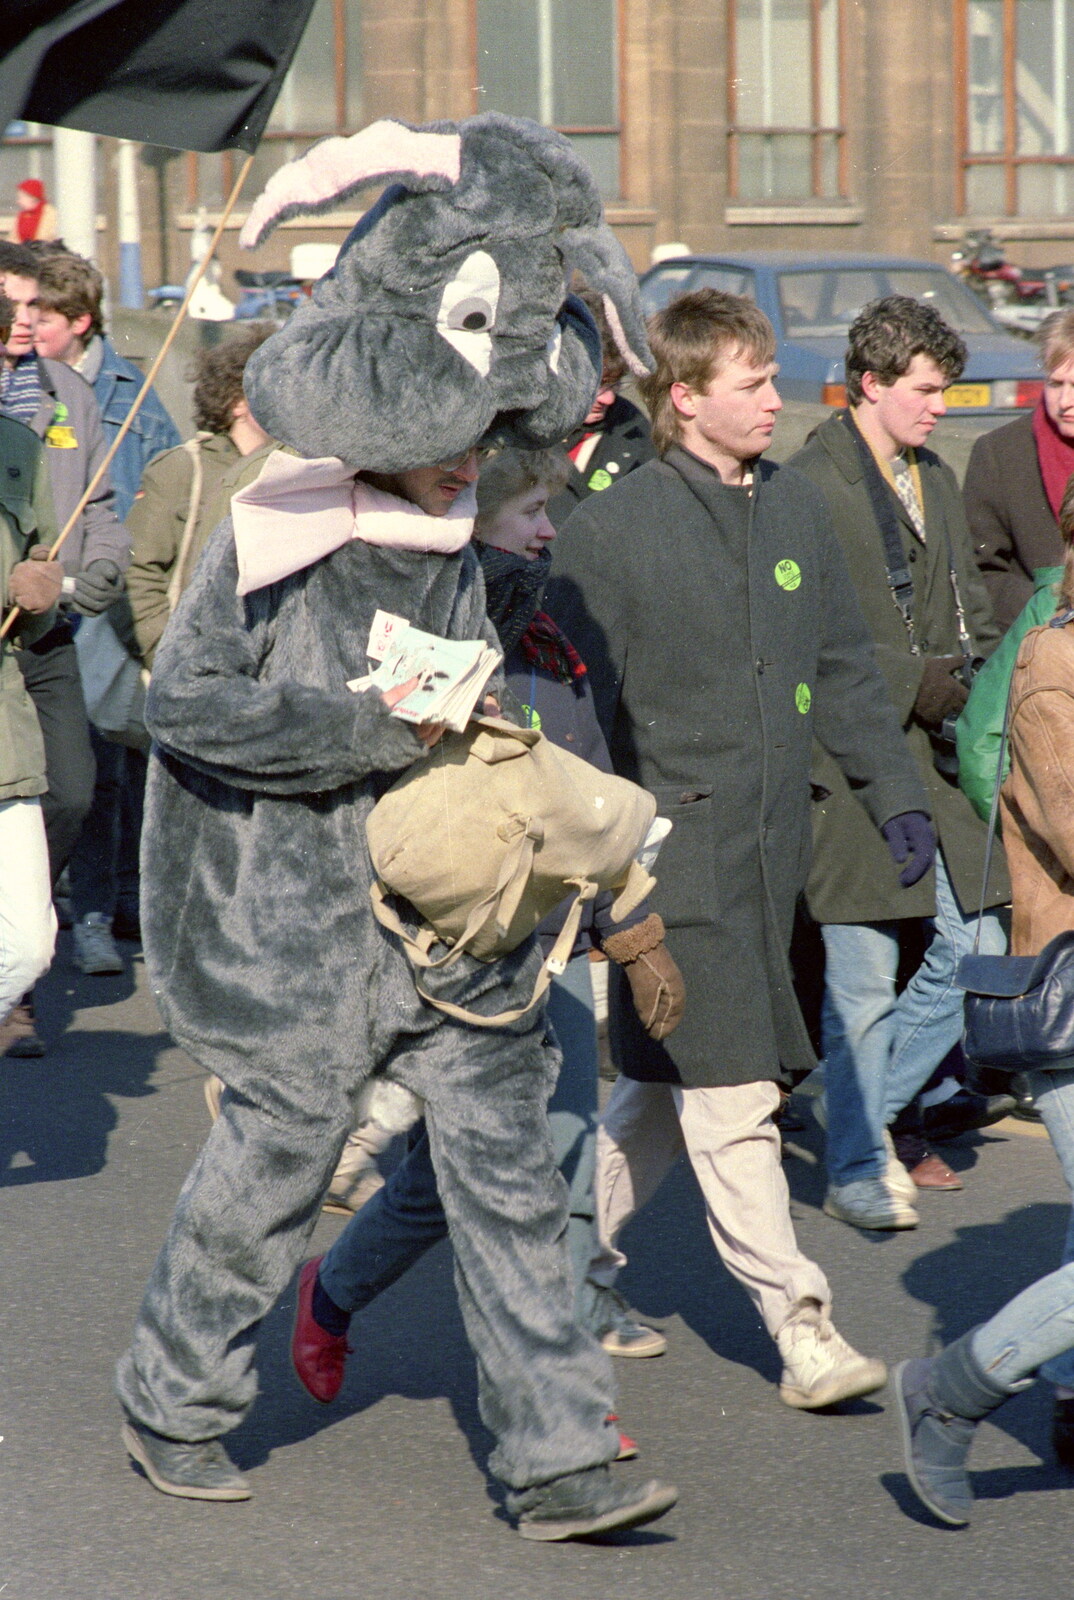 A bloke dressed as a rabbit from Uni: No Chance Fowler! A student Demonstration, London - 26th February 1986